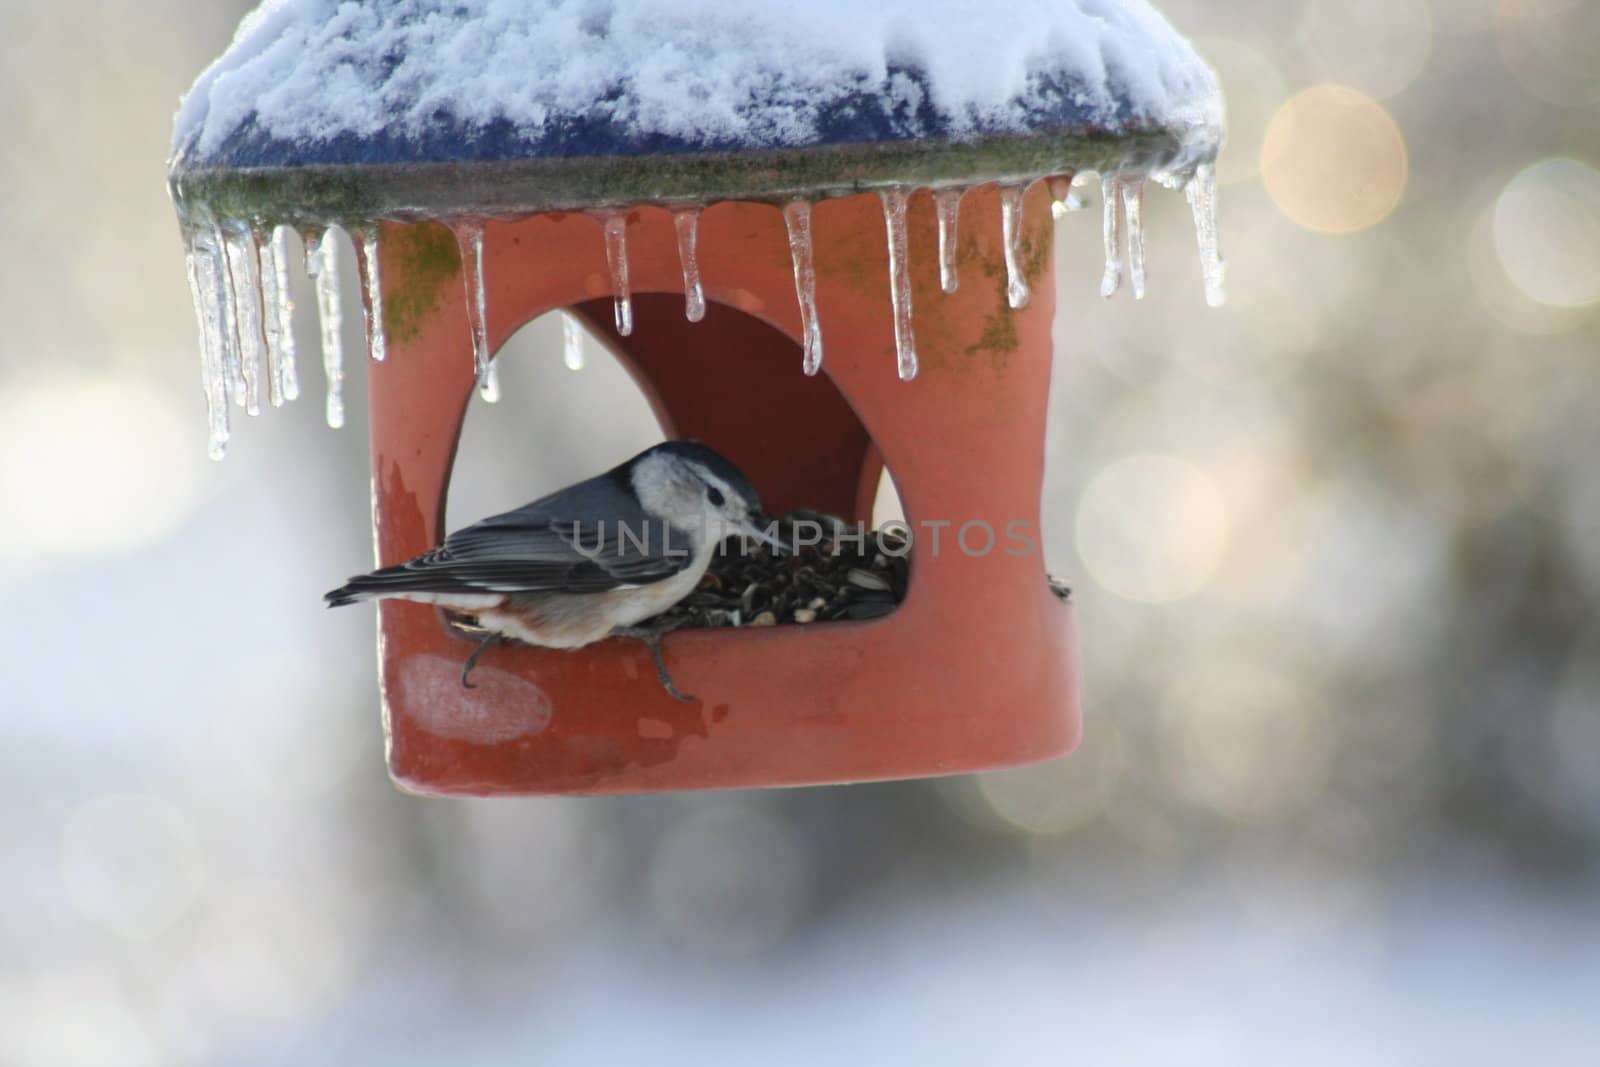 Bird on feeder that has snow and icicles